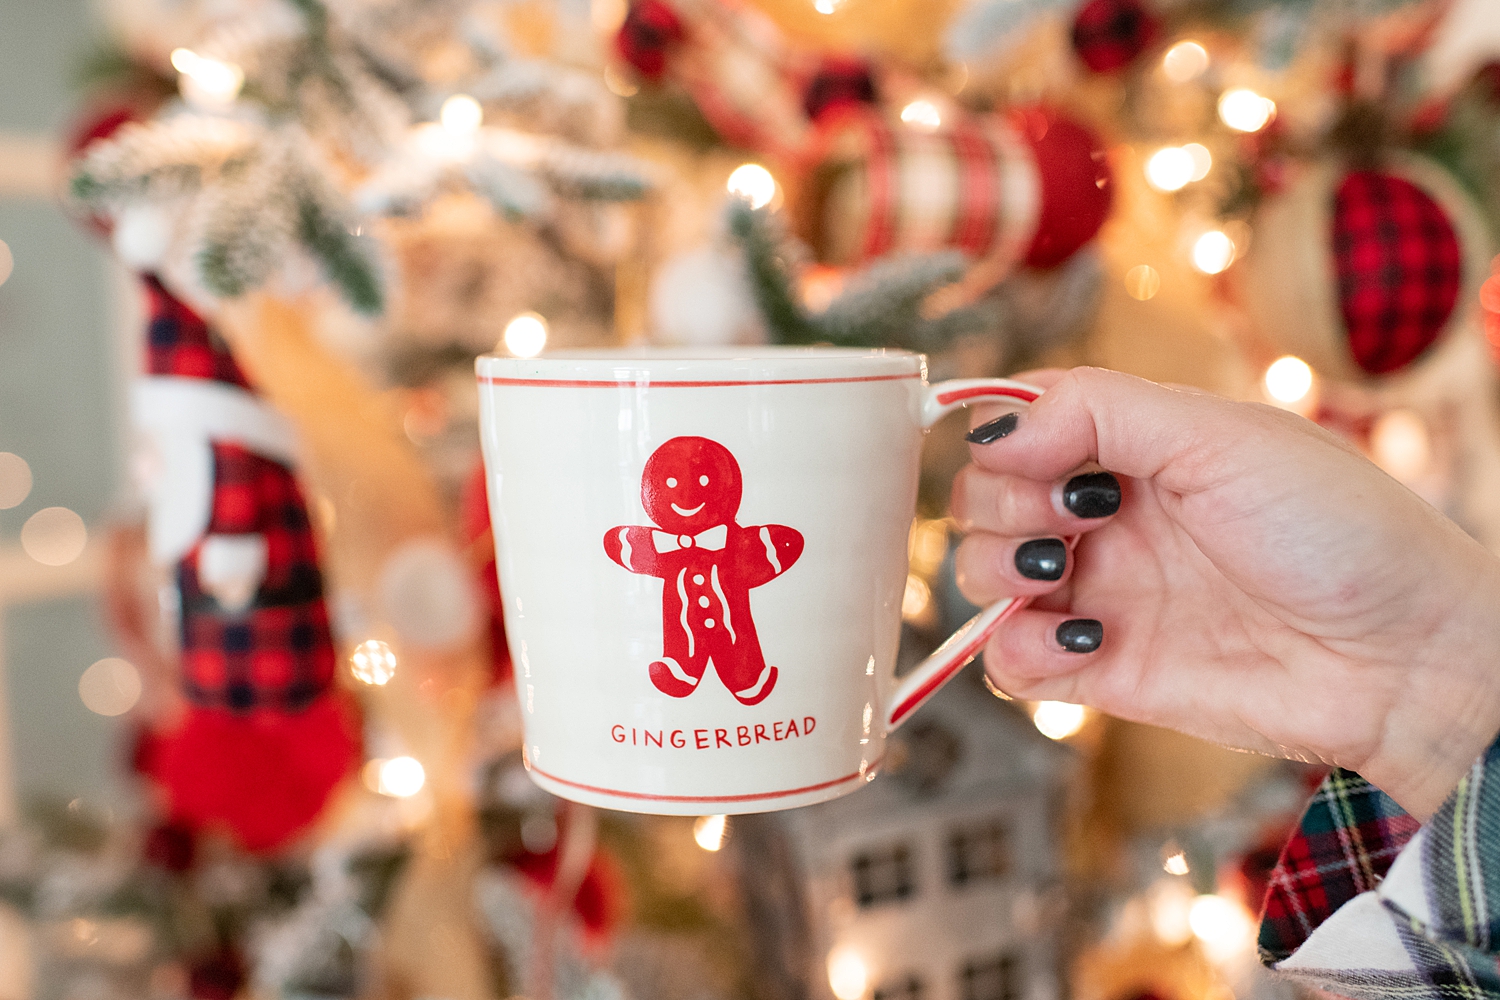 Holiday Pjs & Top Macy's Christmas Gifts featured by top Houston life and style blog, Fancy Ashley" image of a Christmas mug available at Macy's